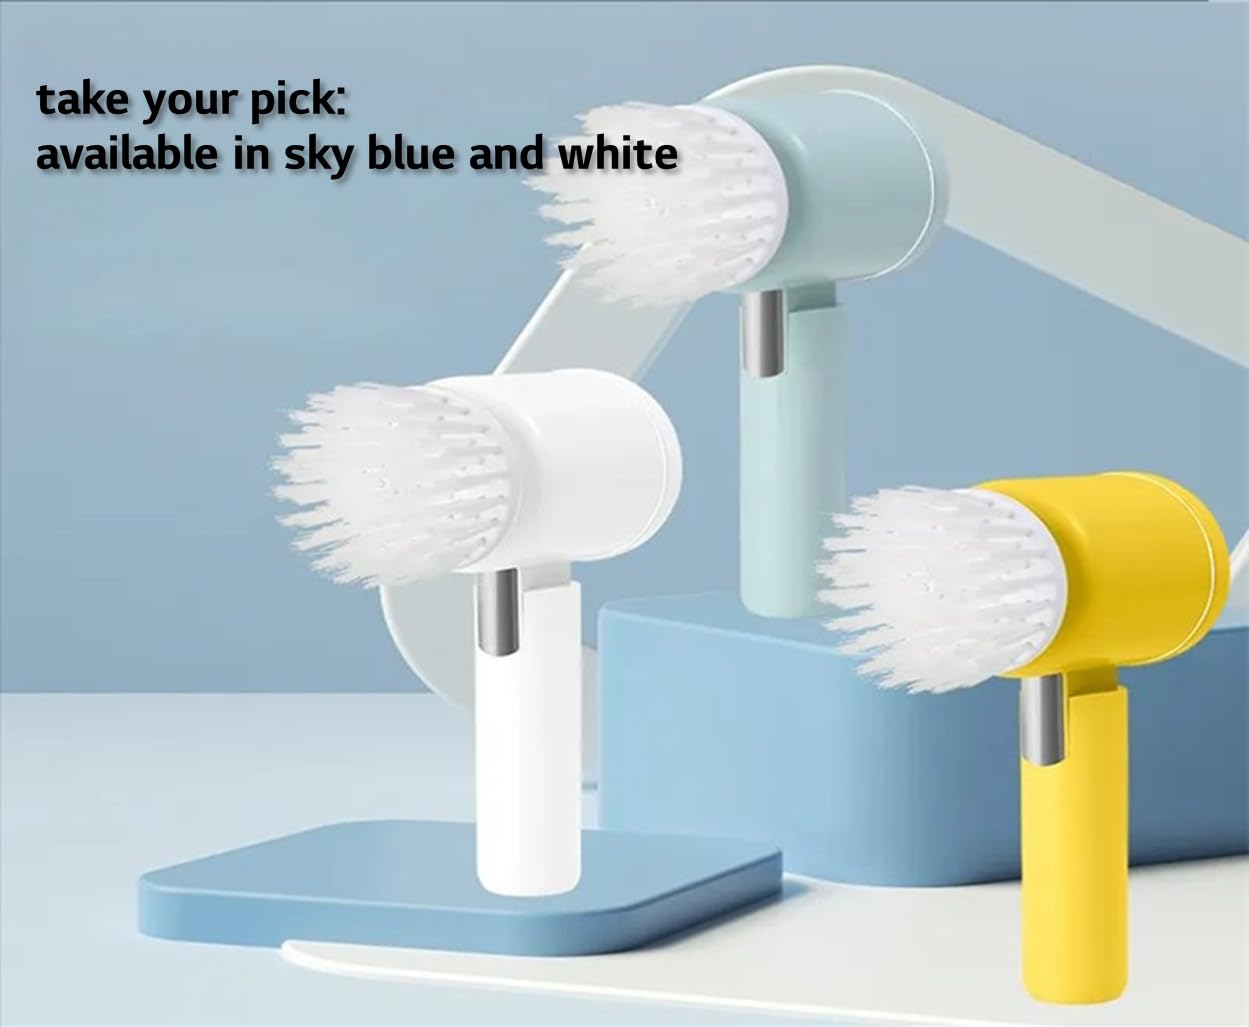 Powerful Spin-Head Cleaning Brush: Portable IPX7 Waterproof 3 Brush Types 3HR Working by LG 18650-type Battery 1-Touch Start for Stubborn Grease & Stain (Sky Blue)